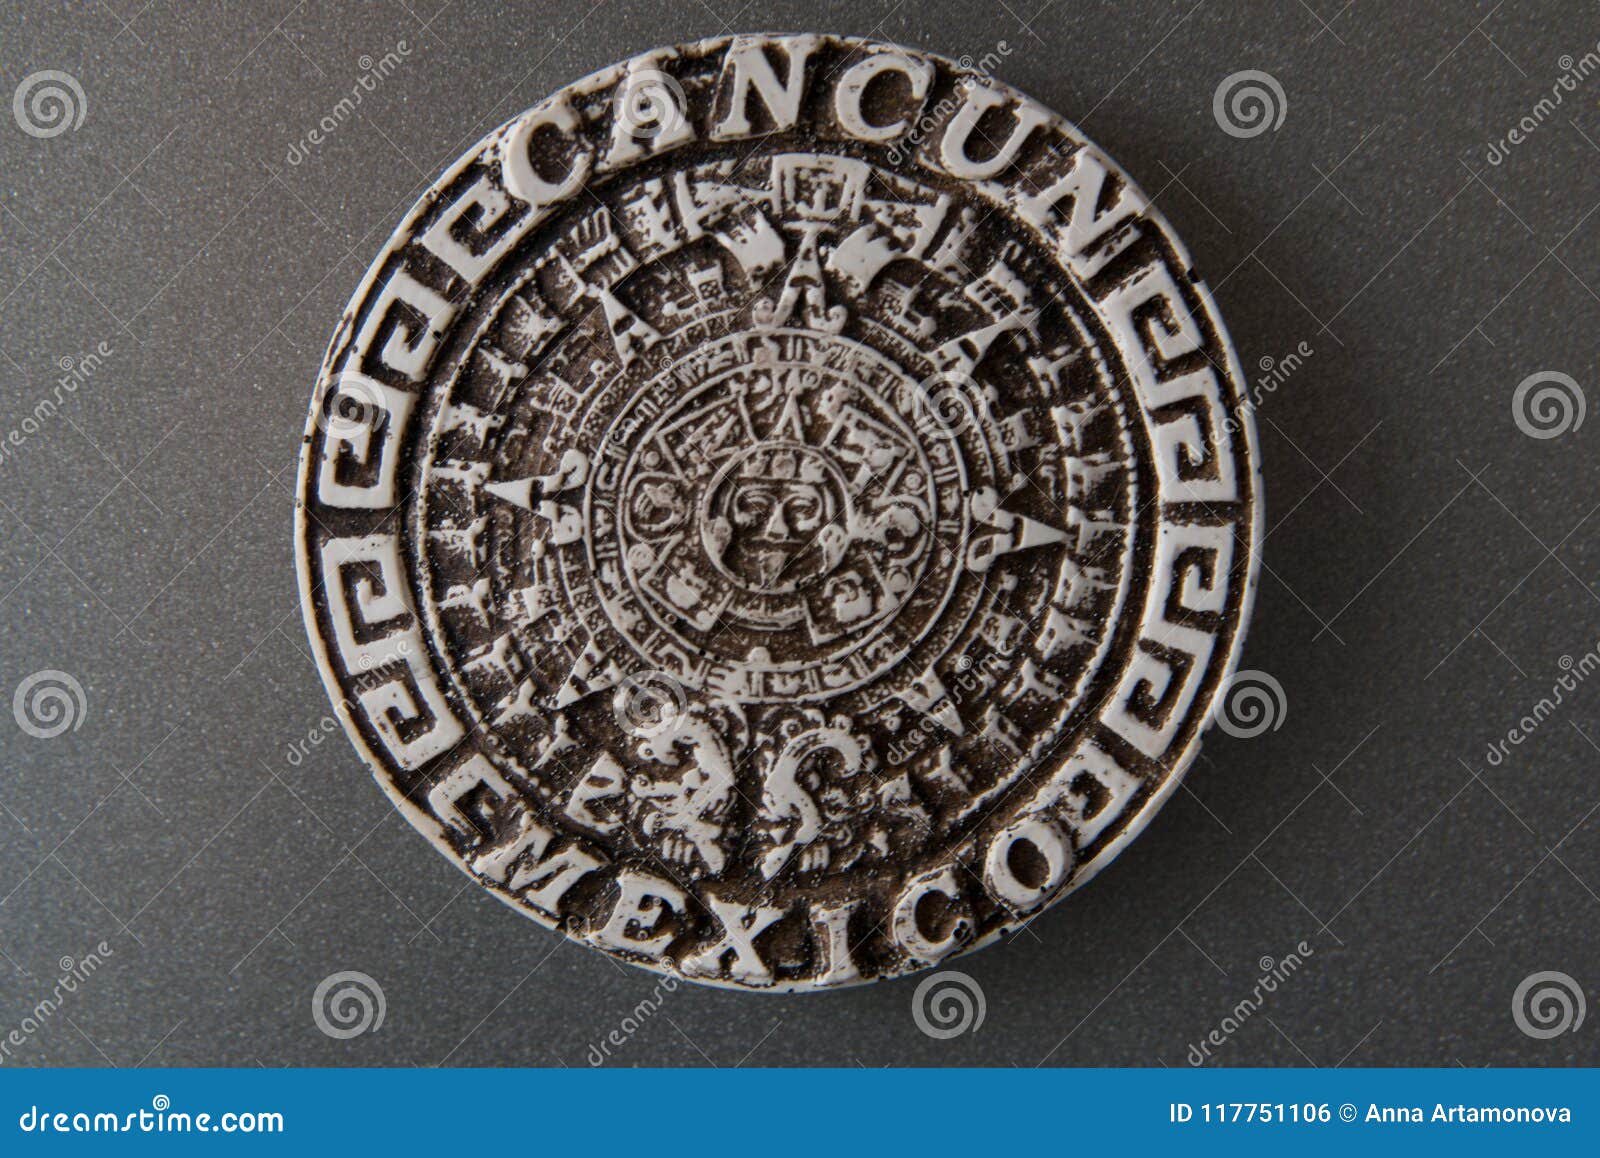 Souvenir for from Mexico. Round Magnet from Stock Photo - Image of ornate, handicraft: